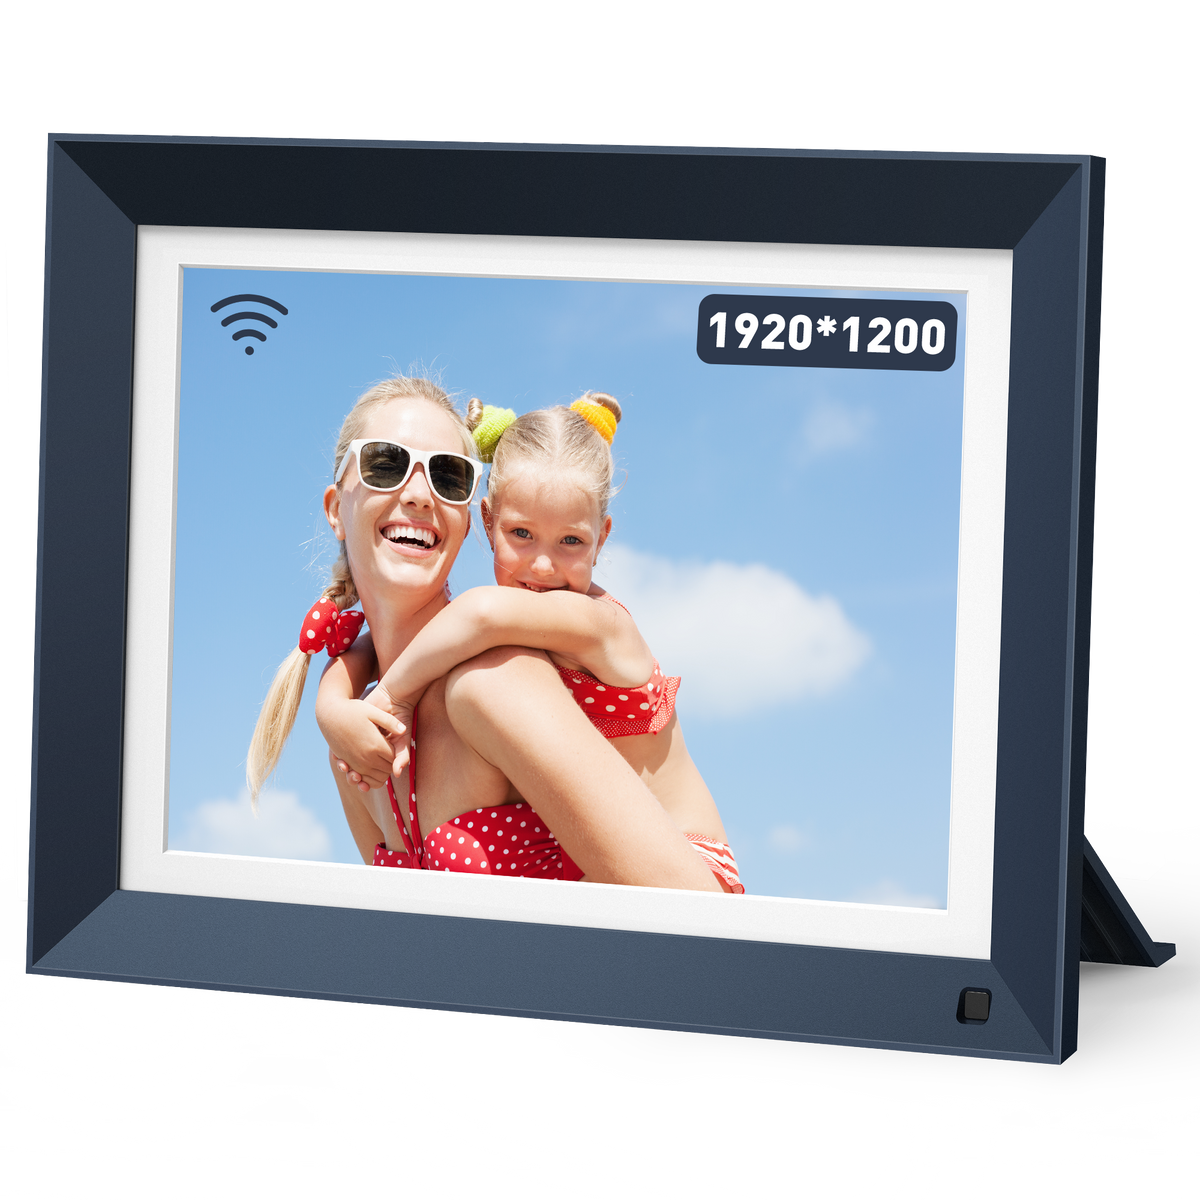 Digital Picture Frame 10.1 Inch IPS Full HD Touch Screen, WiFi Smart P